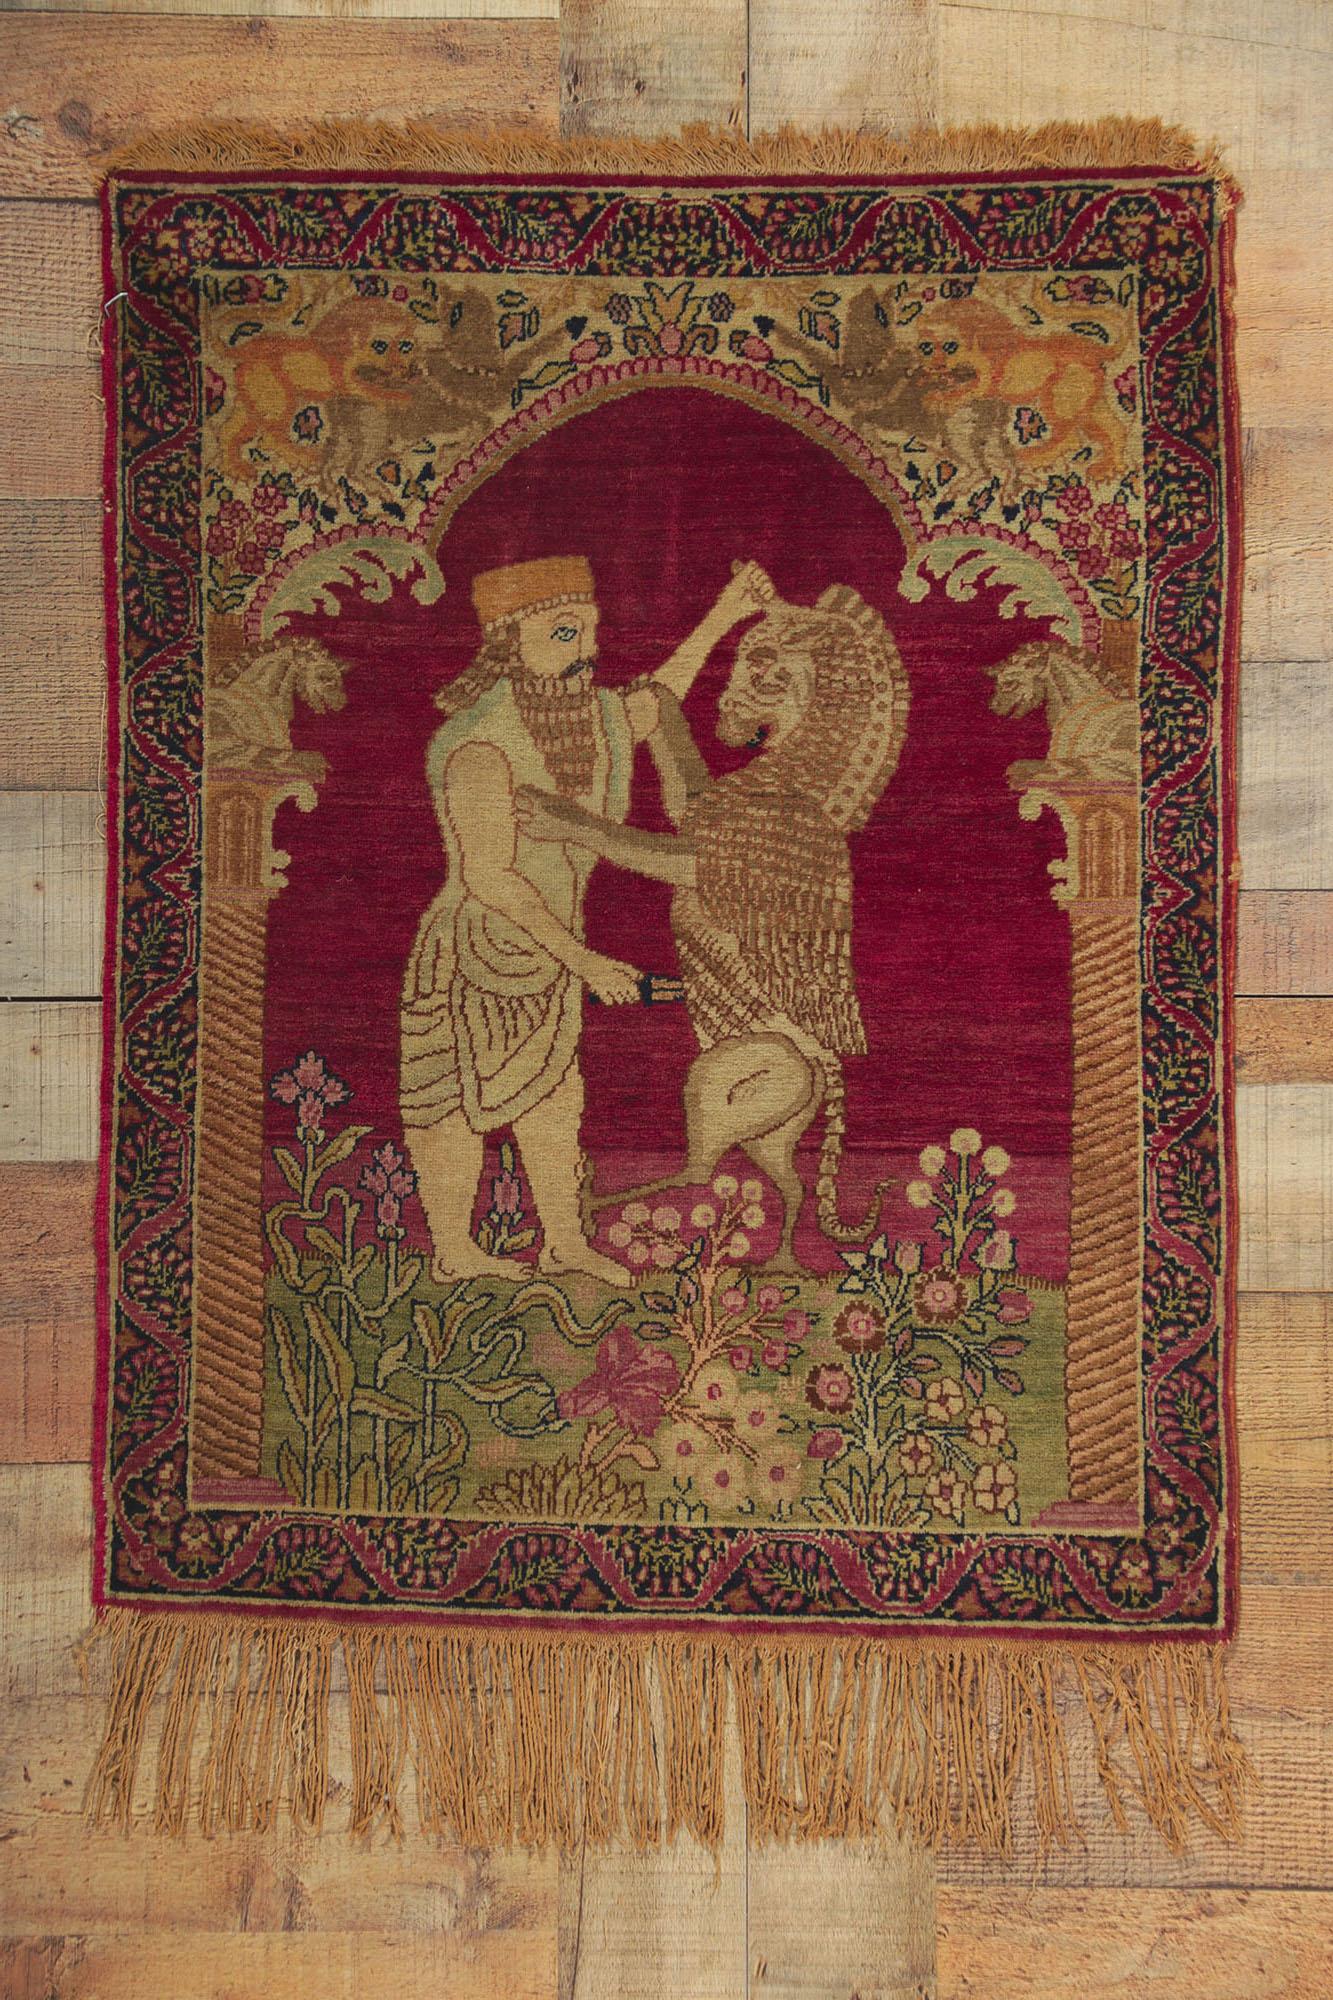 Hand-Knotted Antique Kerman Pictorial Rug Lion & King Darius Achaemenid Mythological Tapestry For Sale